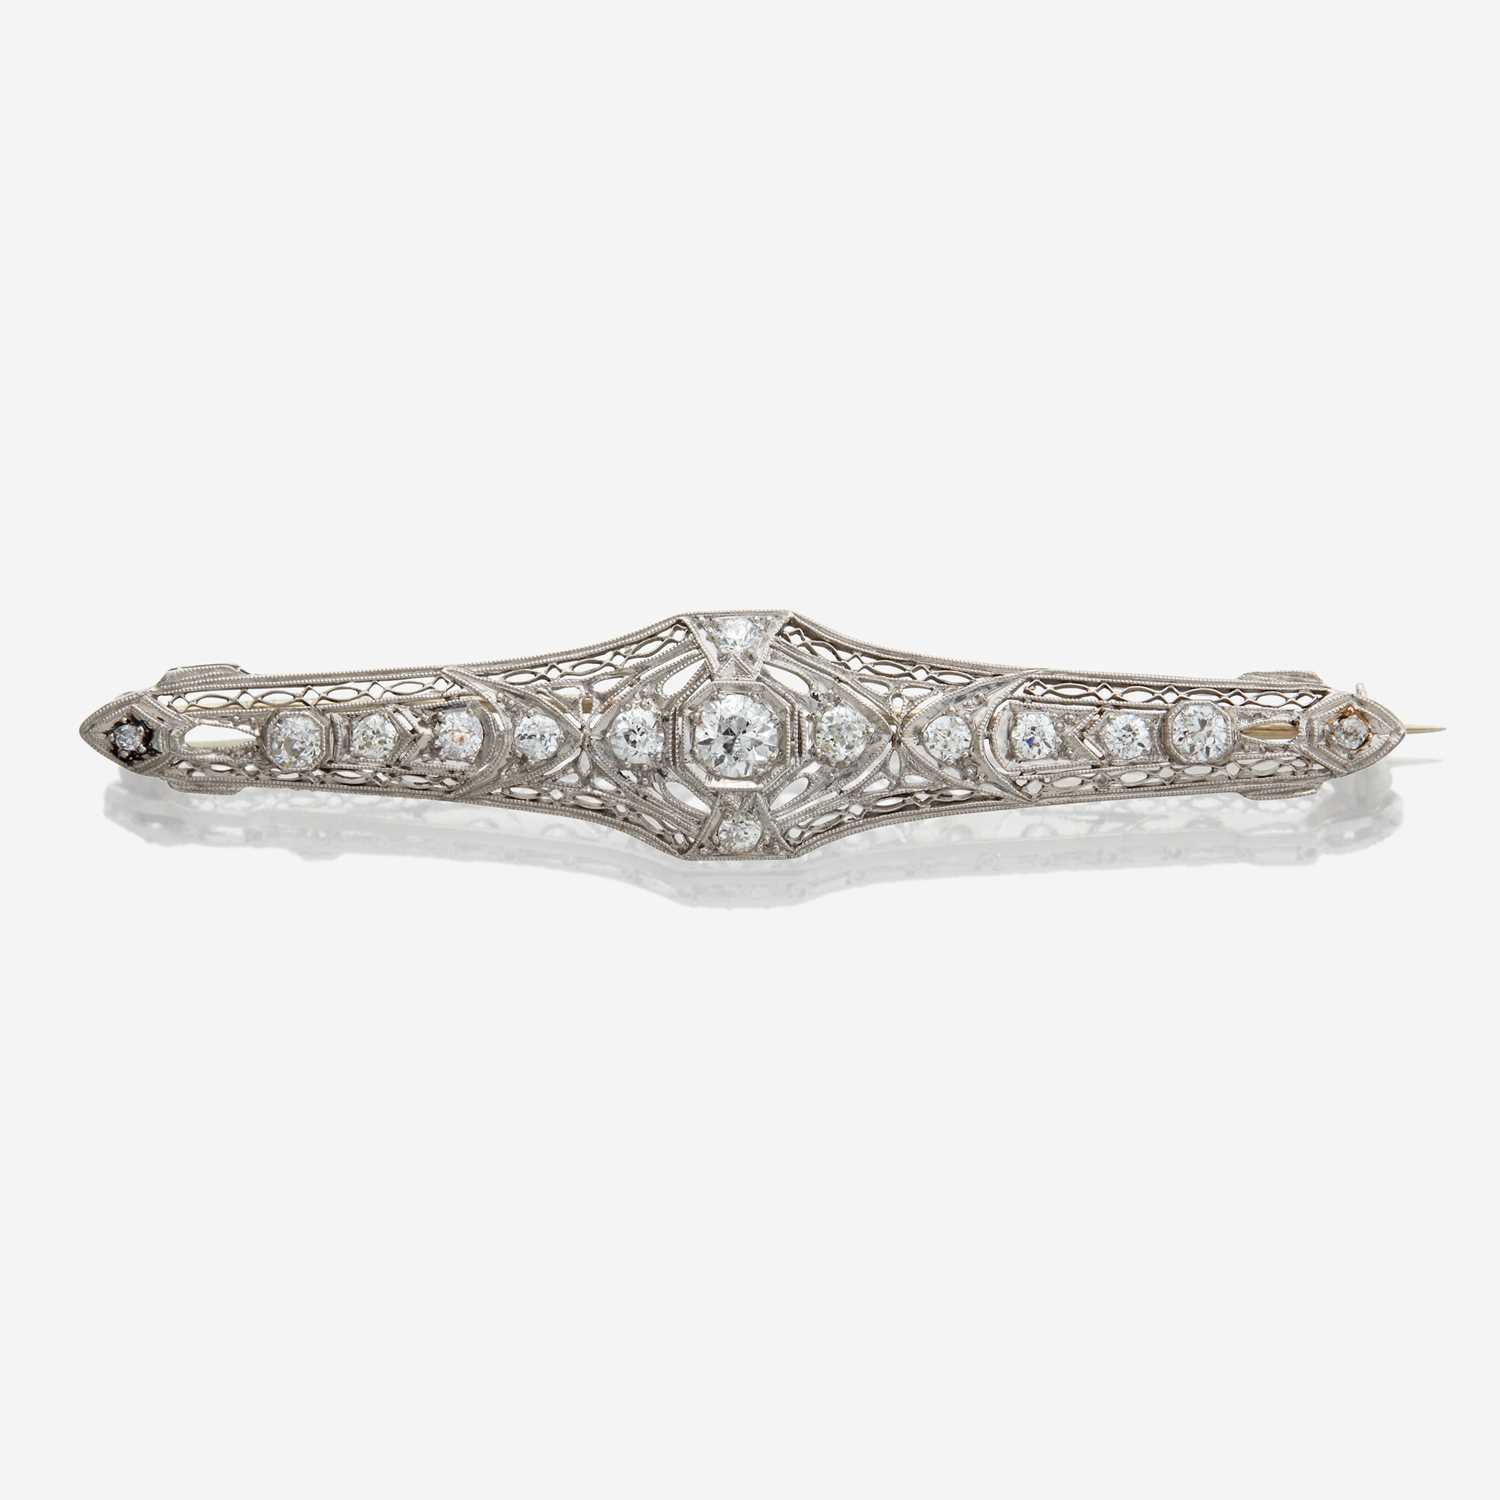 Lot 41 - A white gold and diamond brooch